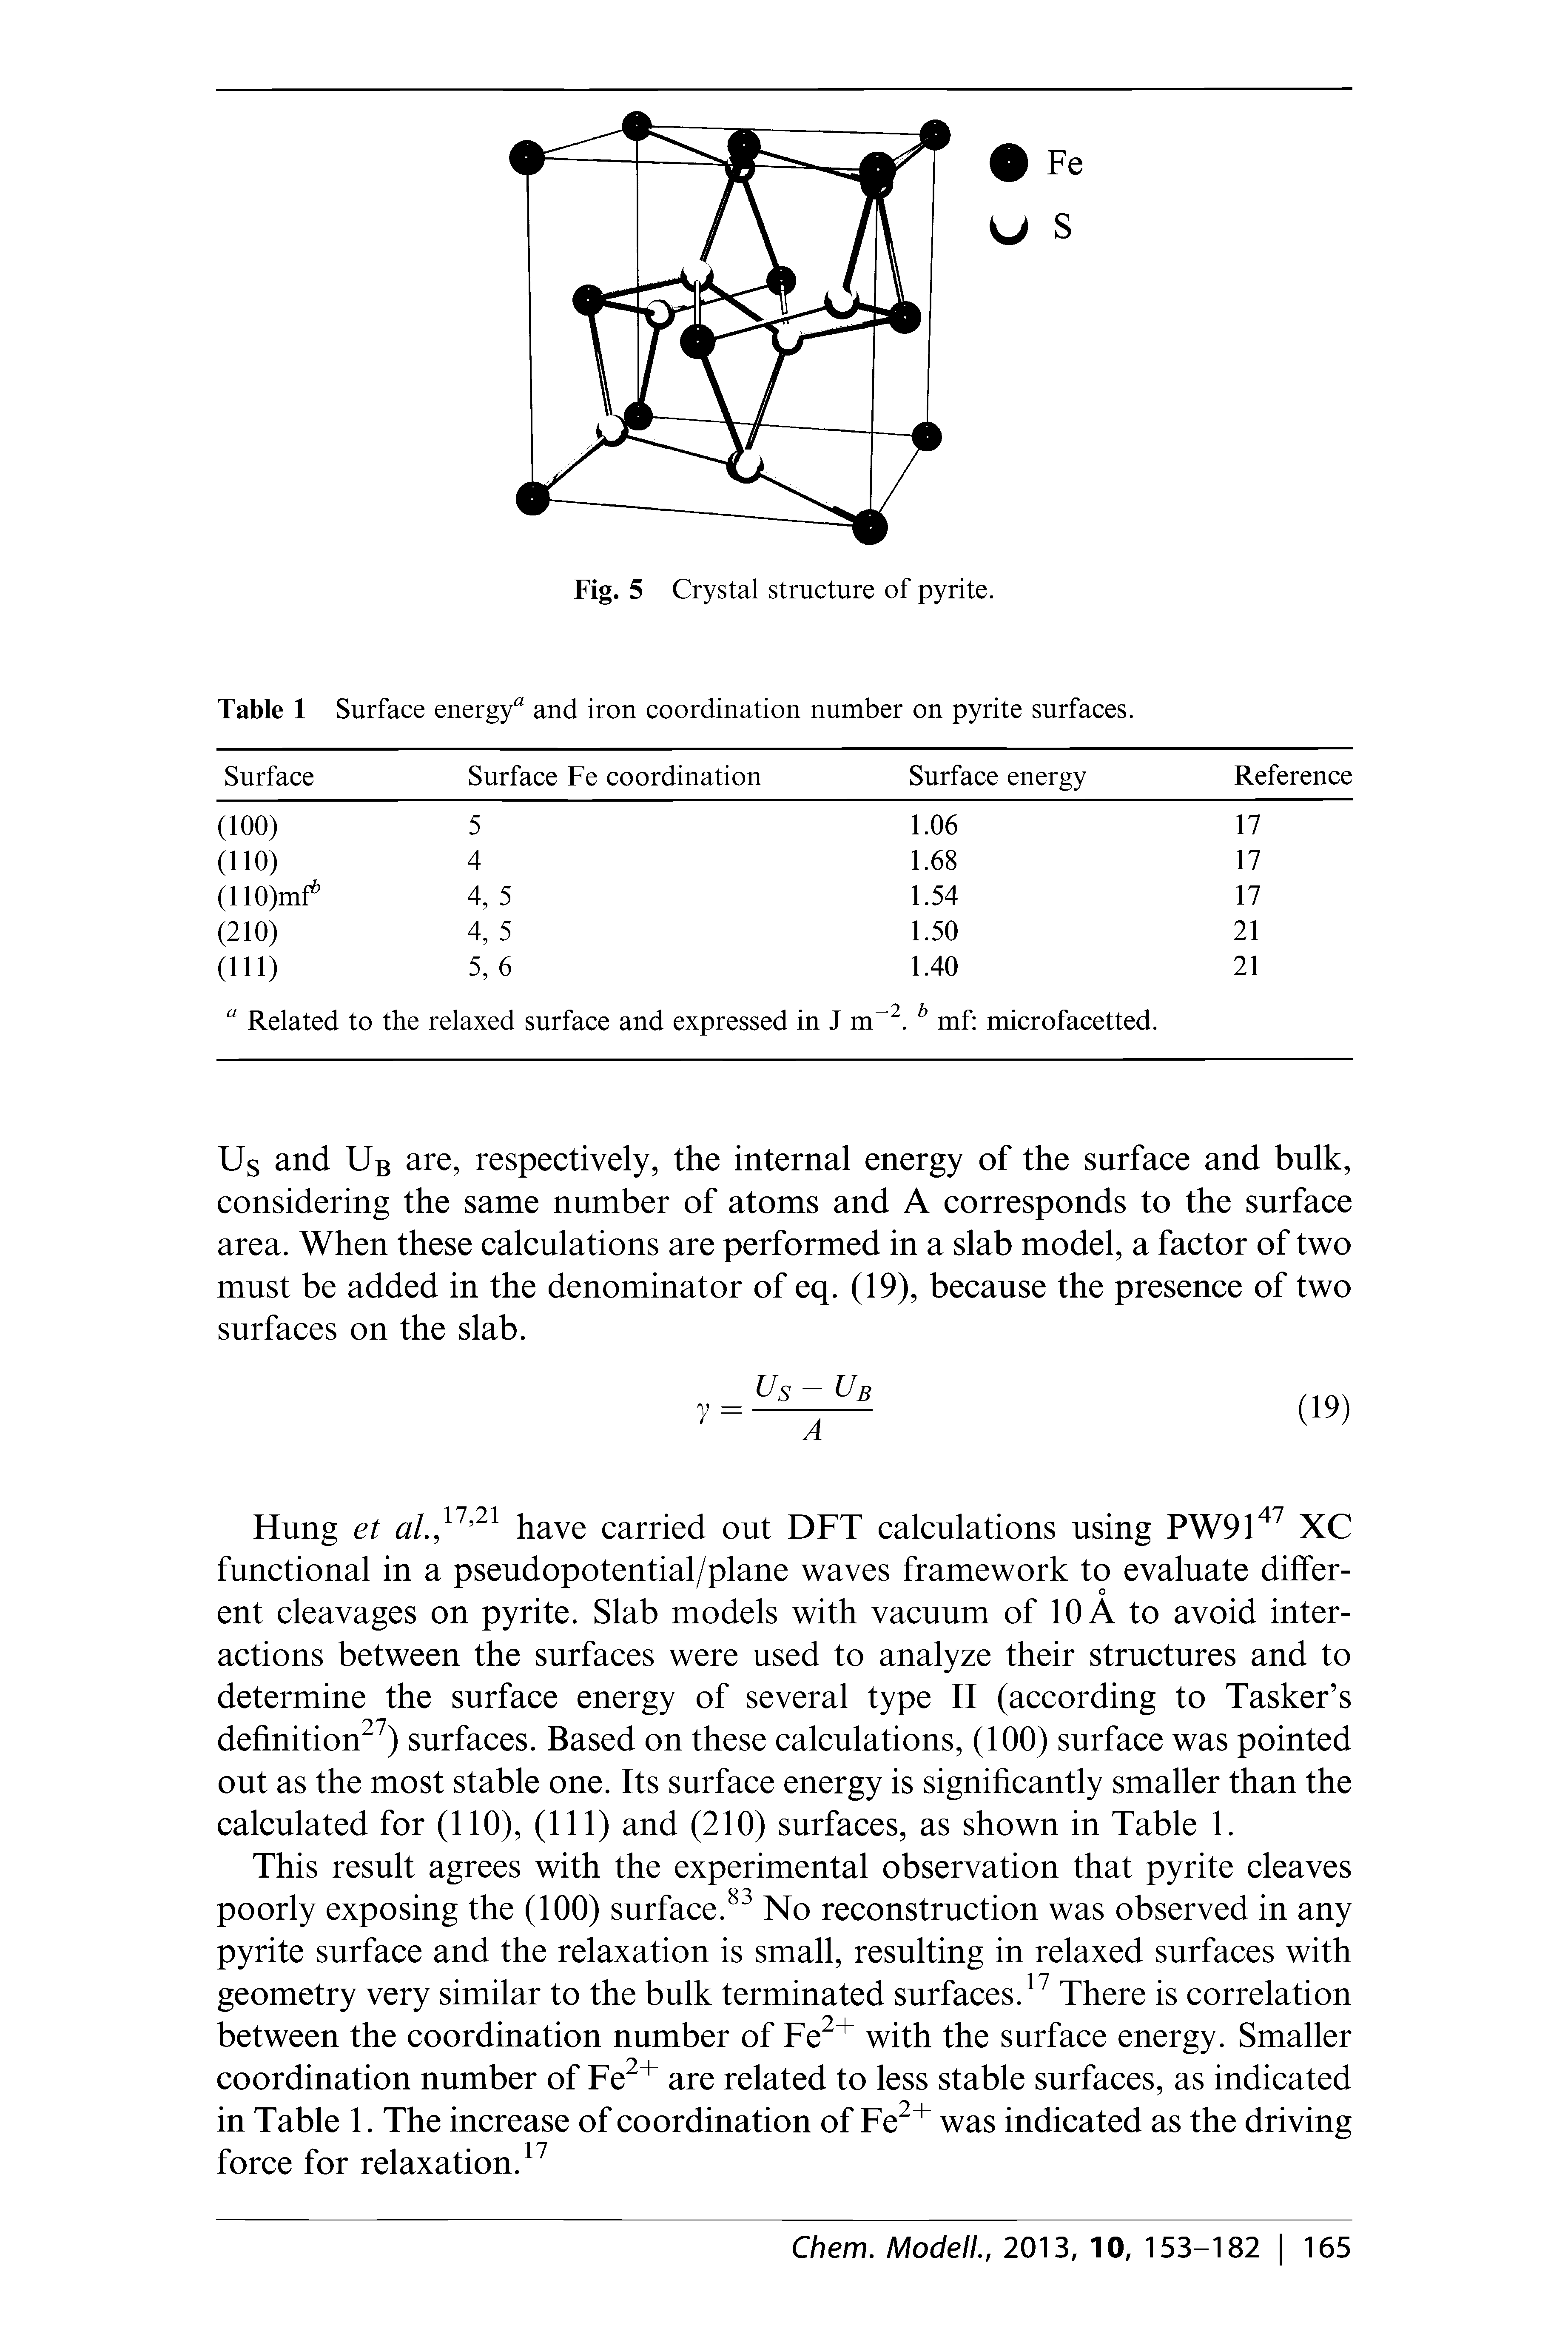 Table 1 Surface energy" and iron coordination number on pyrite surfaces.